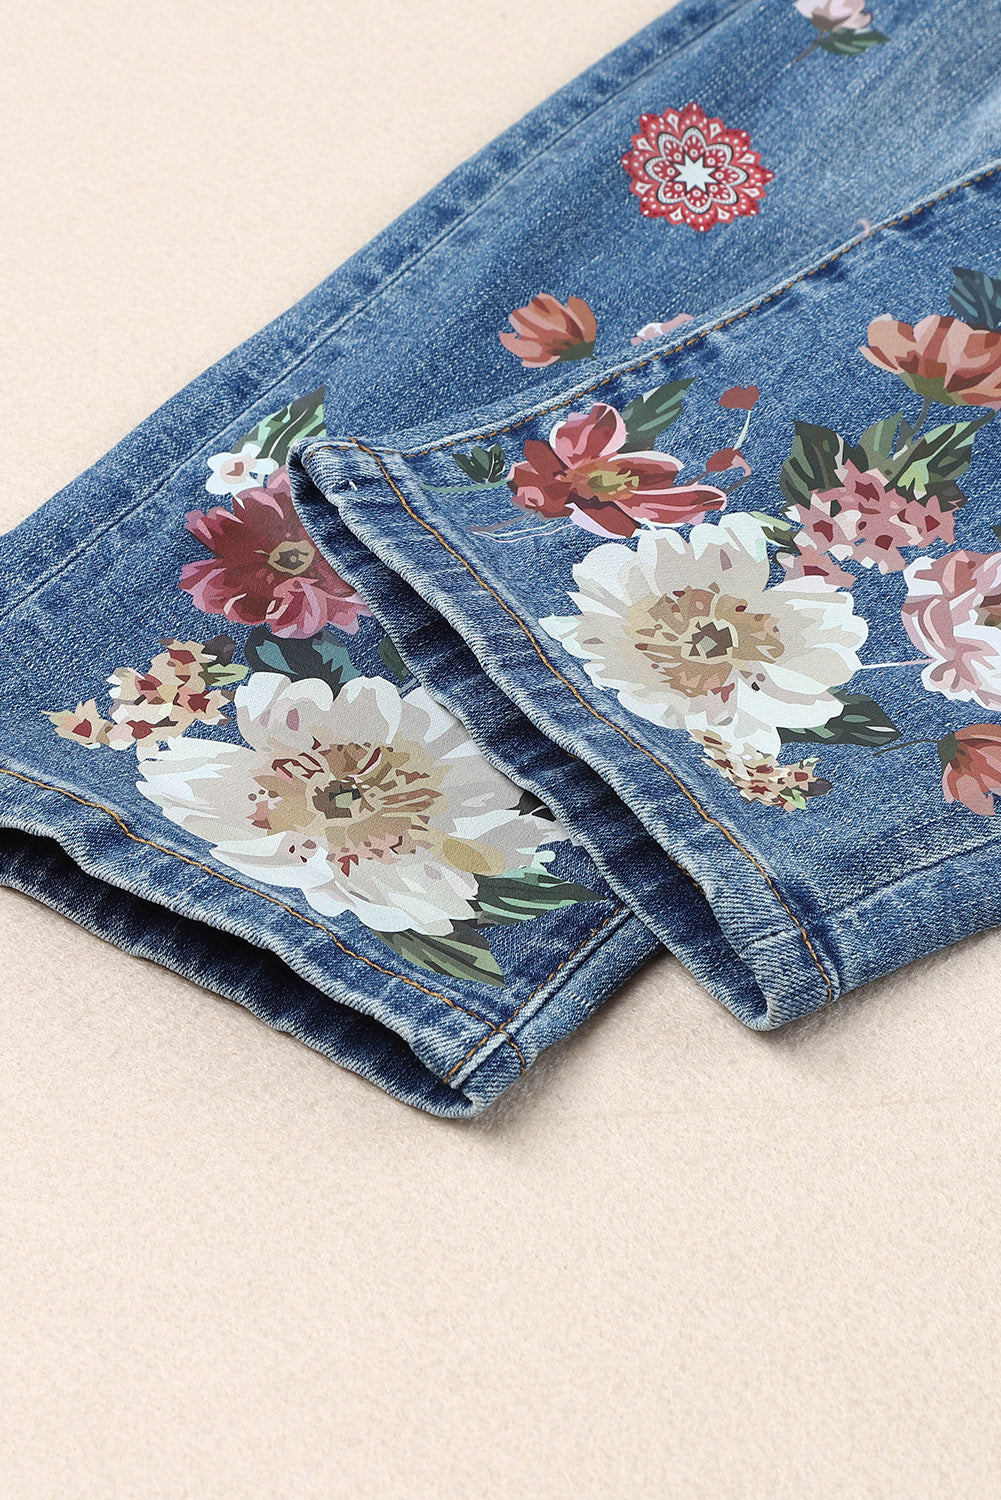 Floral Graphic Patchwork Distressed Jeans The Stout Steer